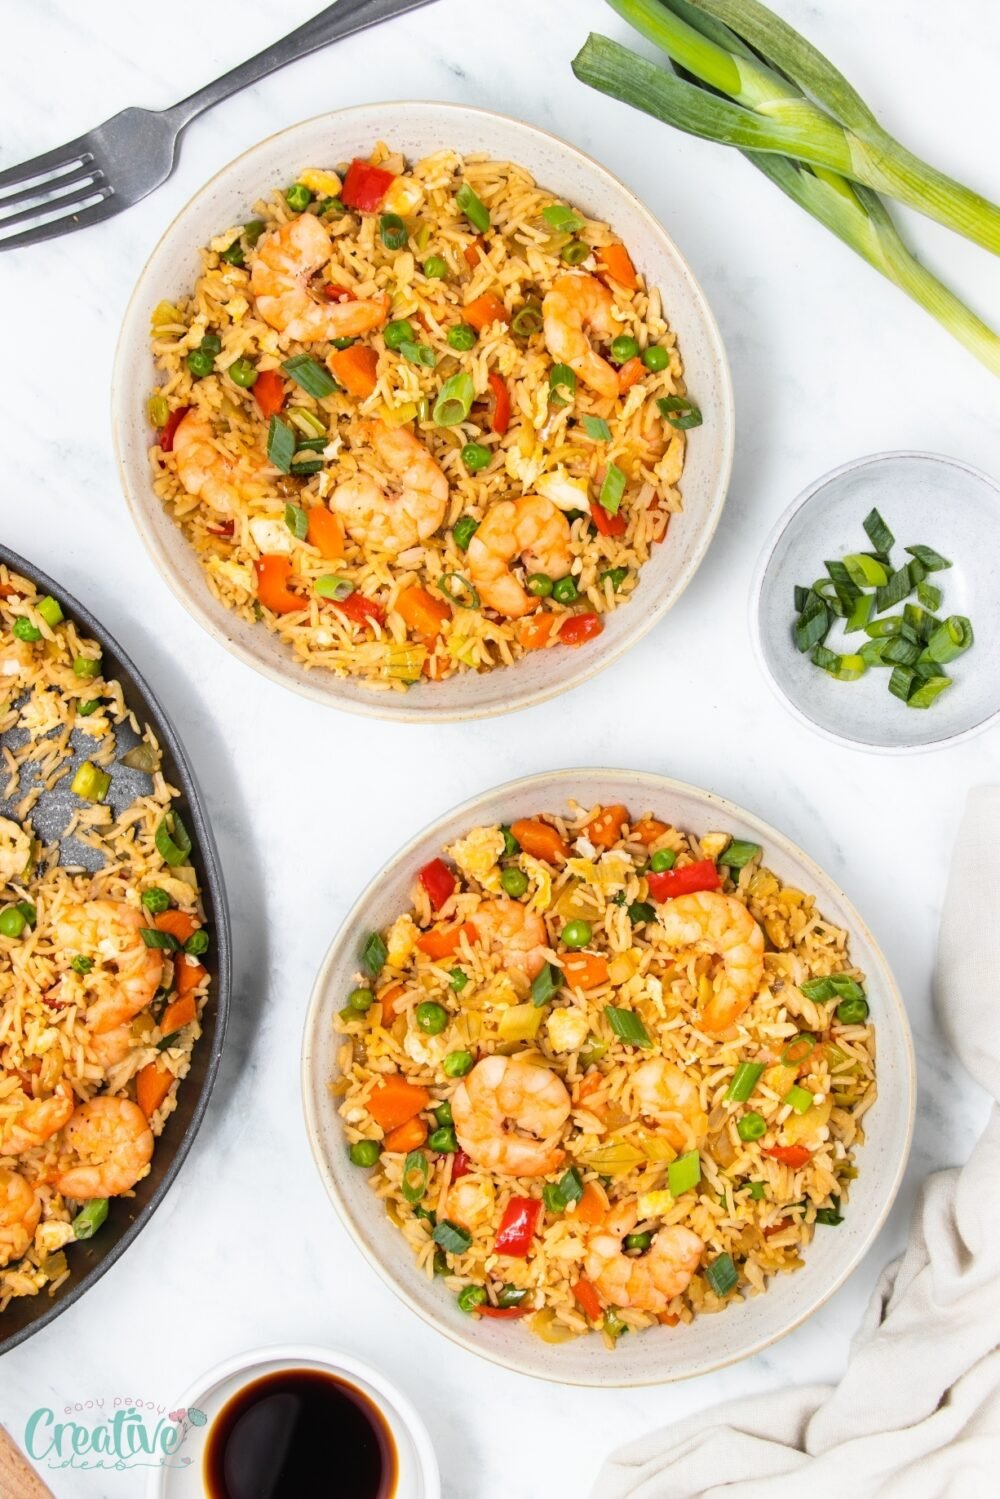 Create a tasty shrimp fried rice recipe featuring flavorful shrimp, crisp vegetables, perfect for quick and easy dinners!